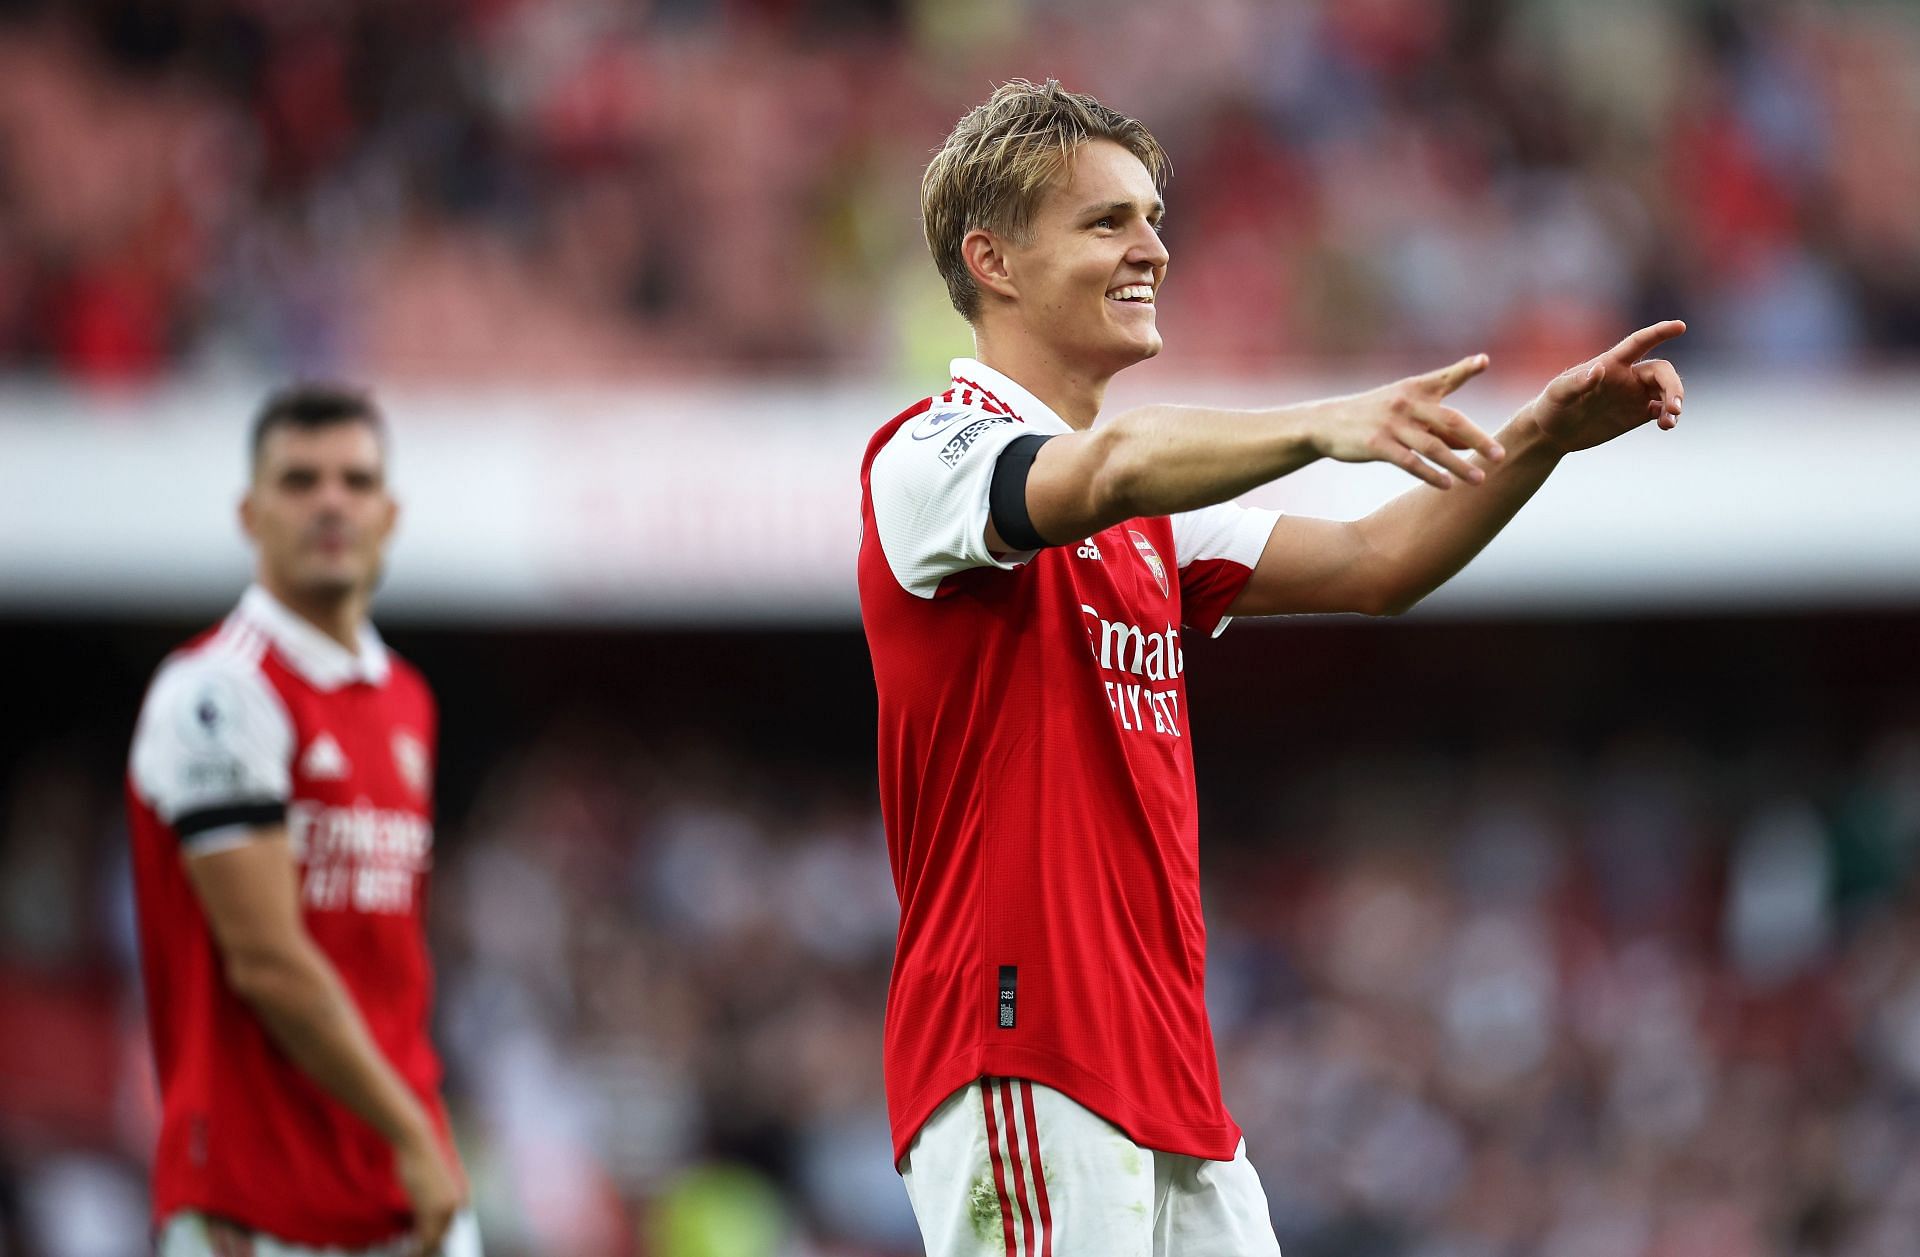 The Norwegian has been a shining light for the Gunners so far this season.